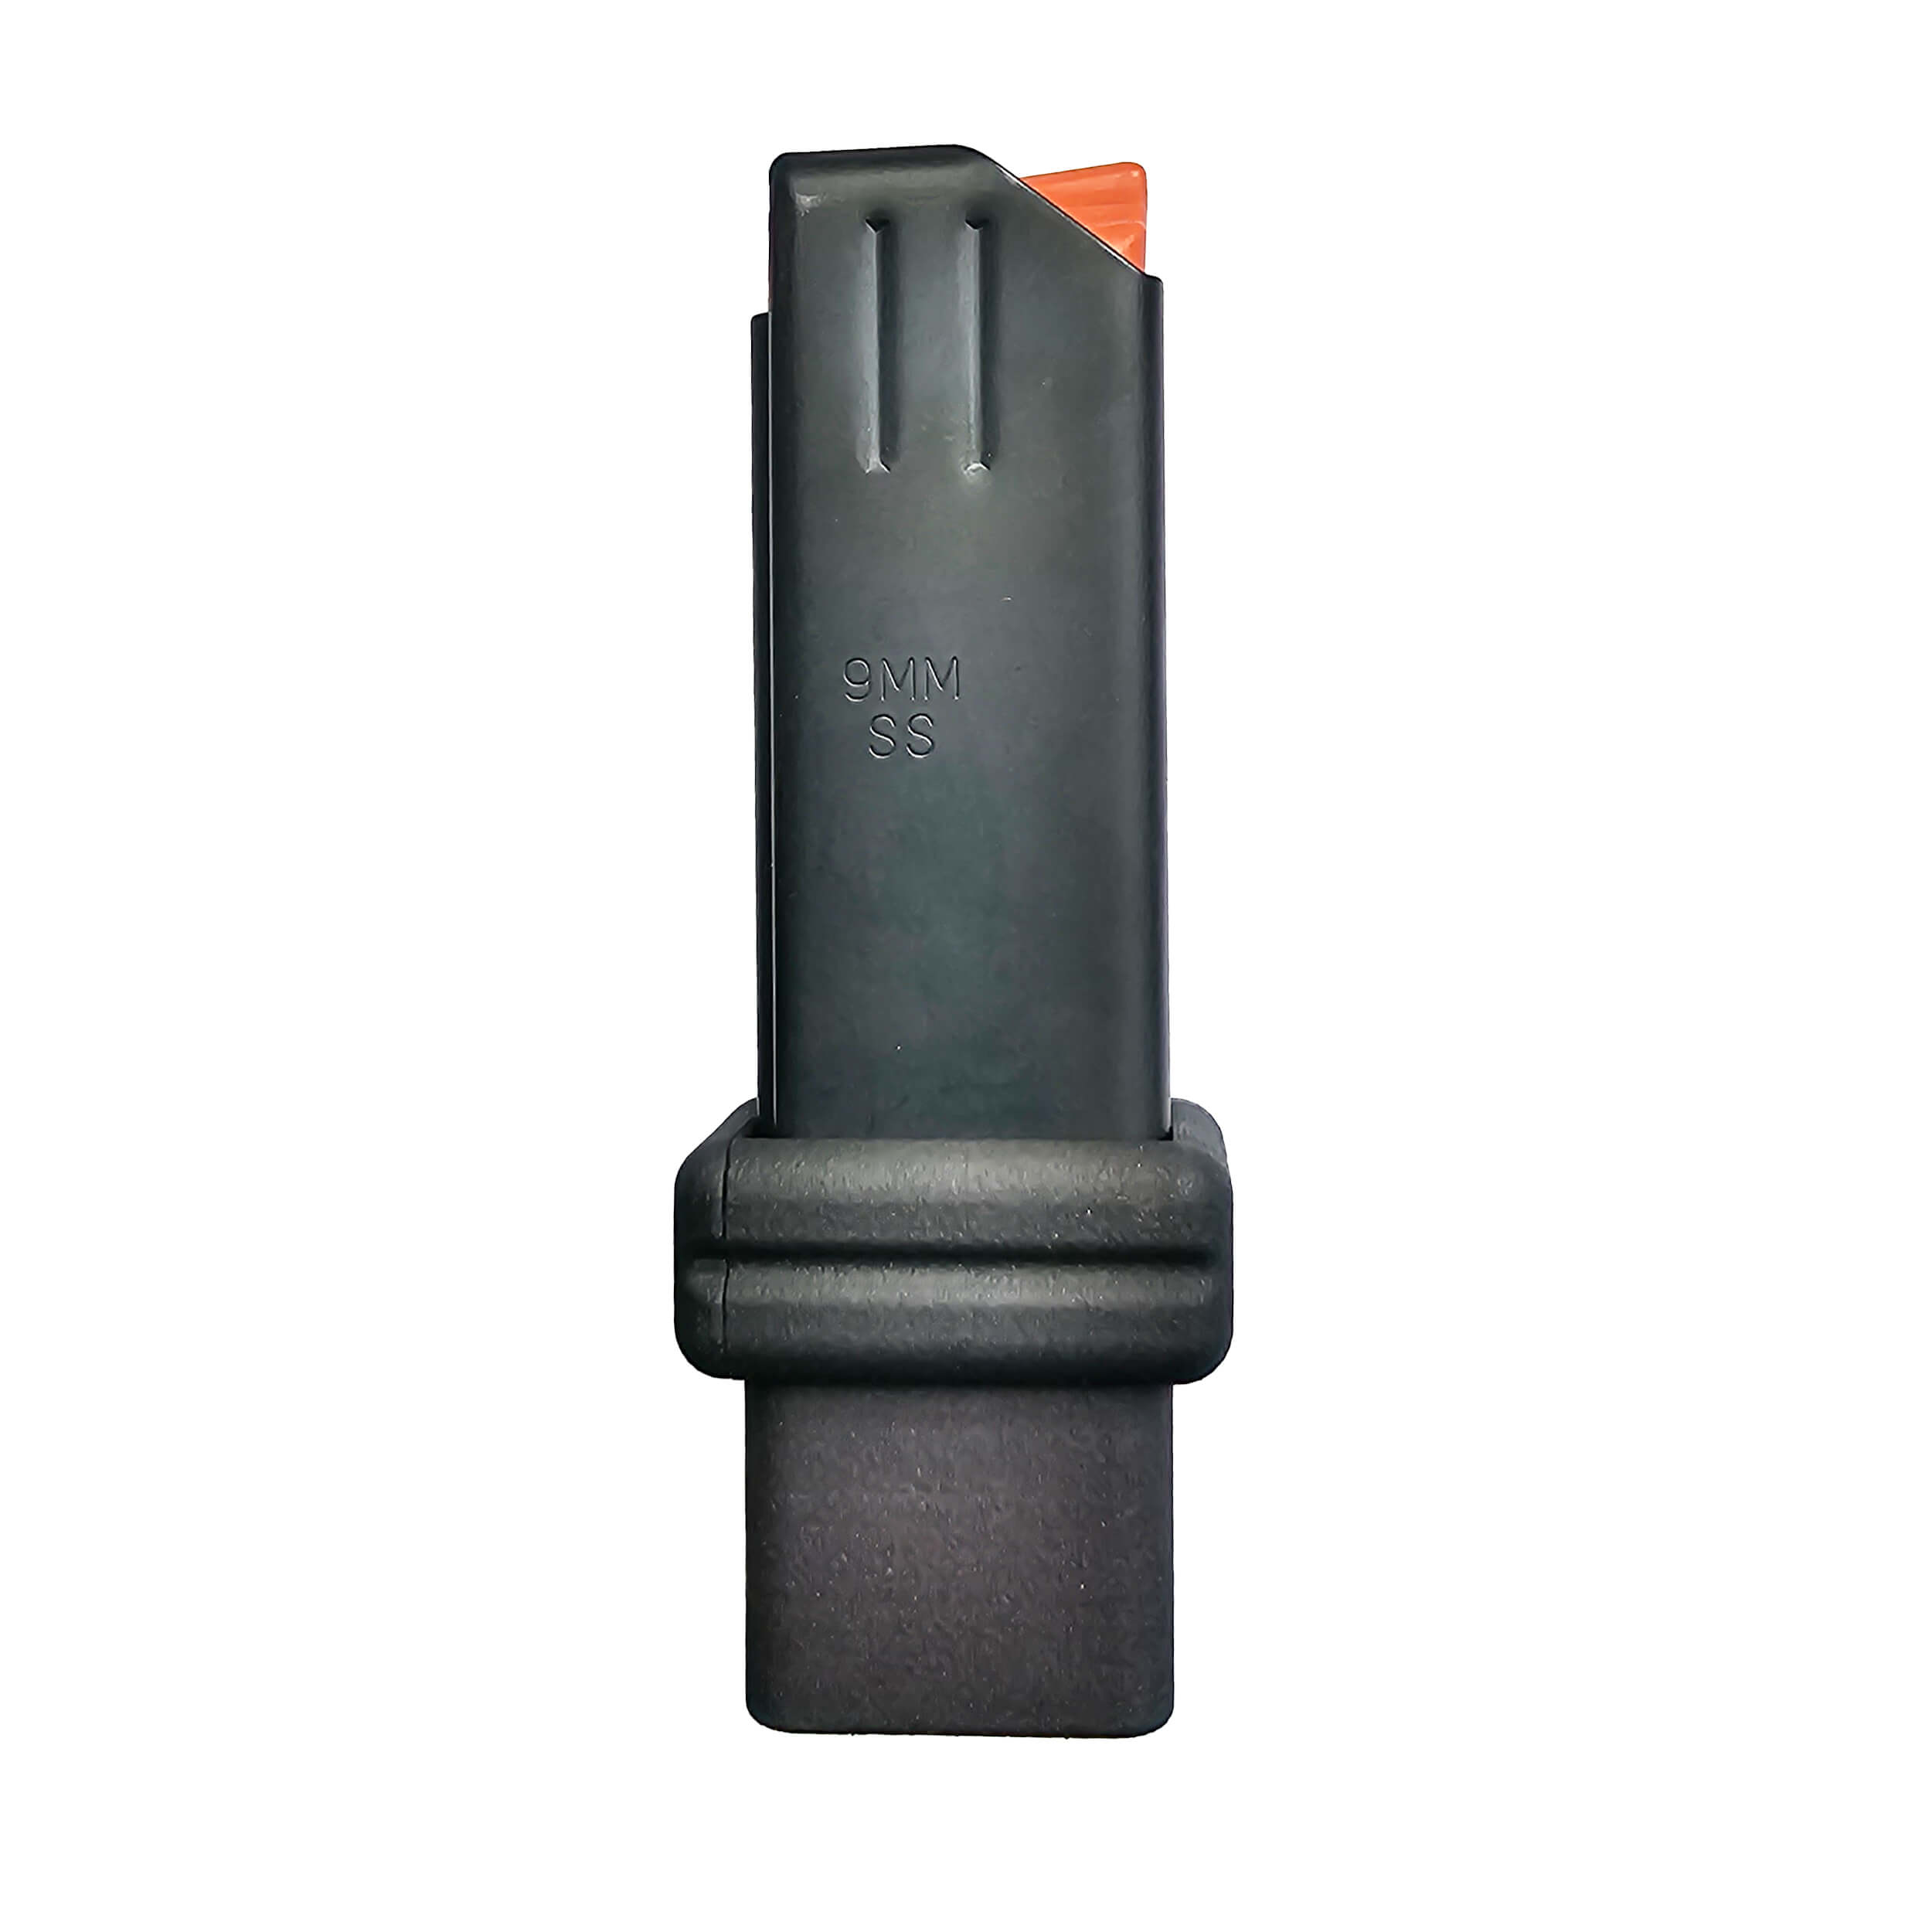 ISSProtectiontrade Magazine coupler grip with 1x Colt Magazin from DURAMAG USA 